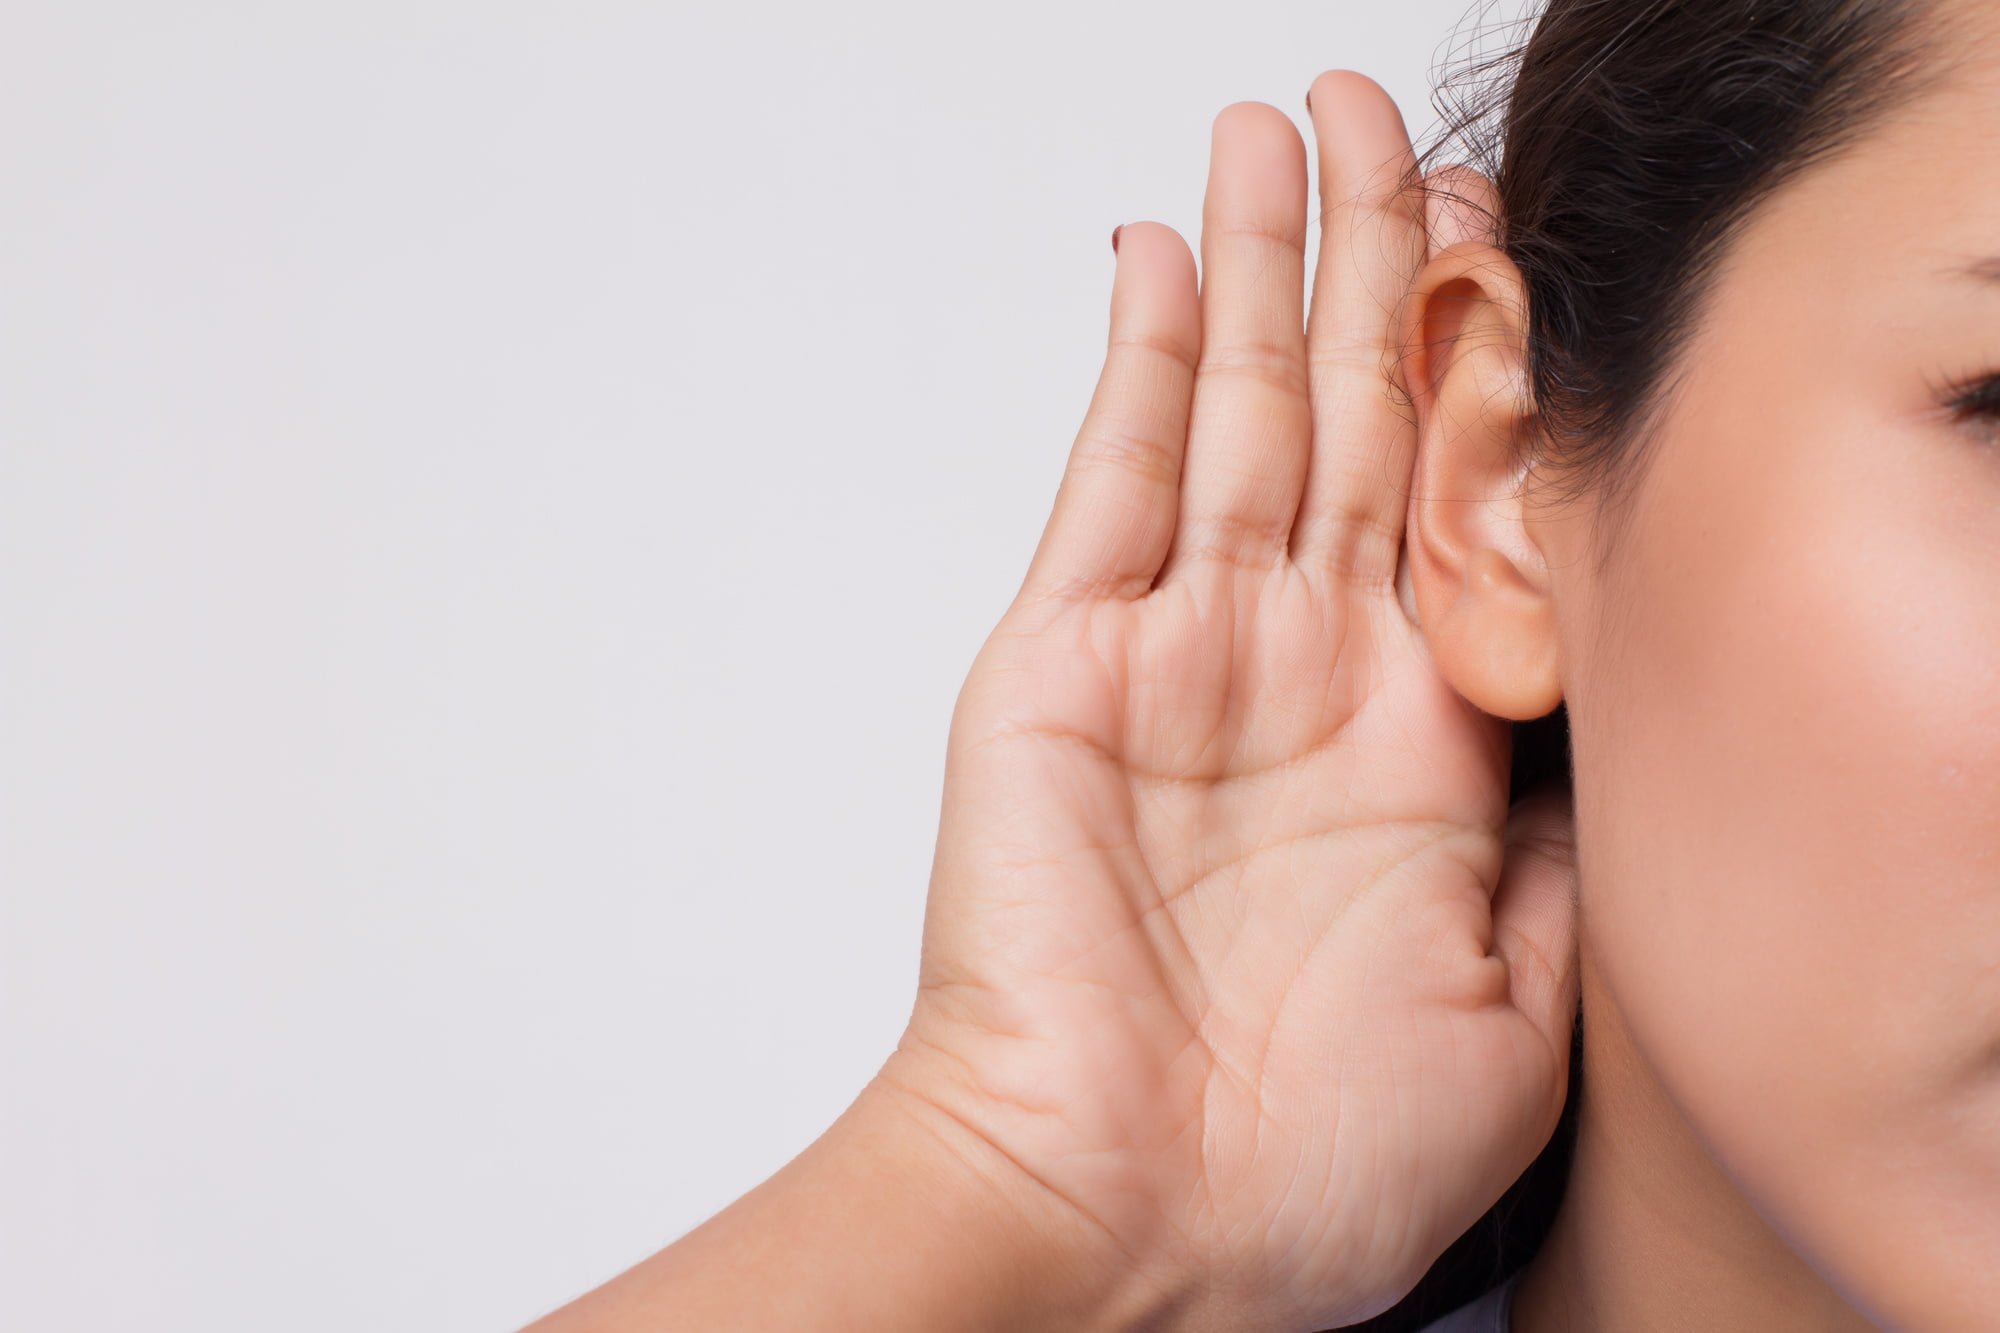 Did you know that not all hearing loss occurs equally these days? Here are the many different types of hearing loss that doctors diagnose today.